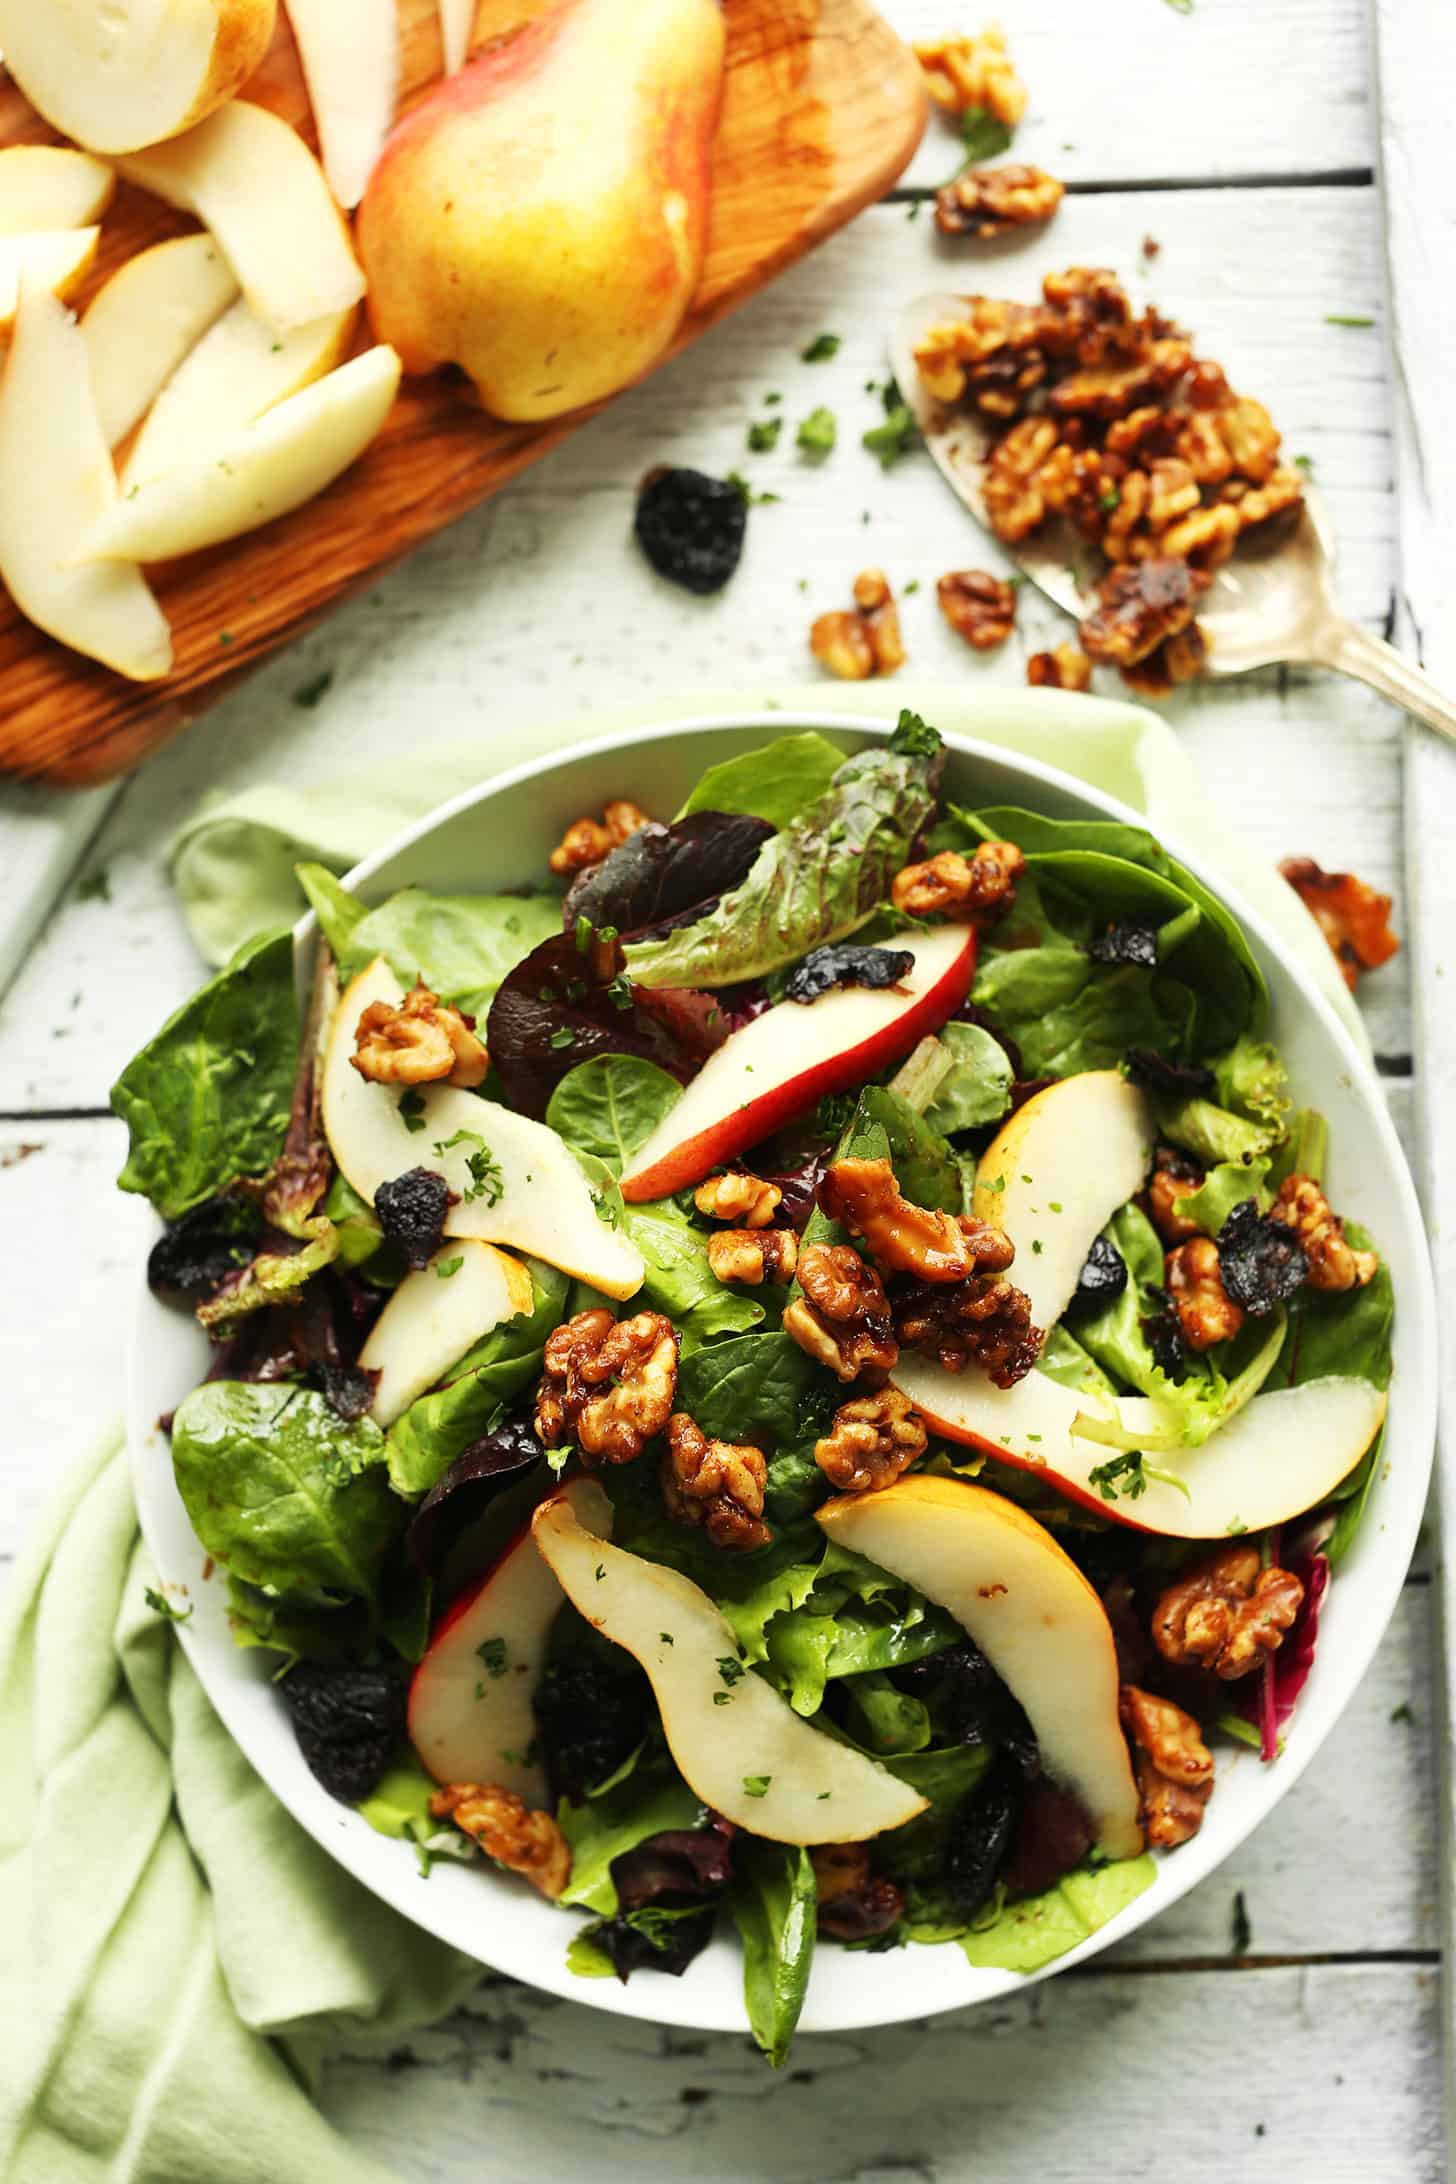 Pear balsamic salad with dried cherries and walnuts